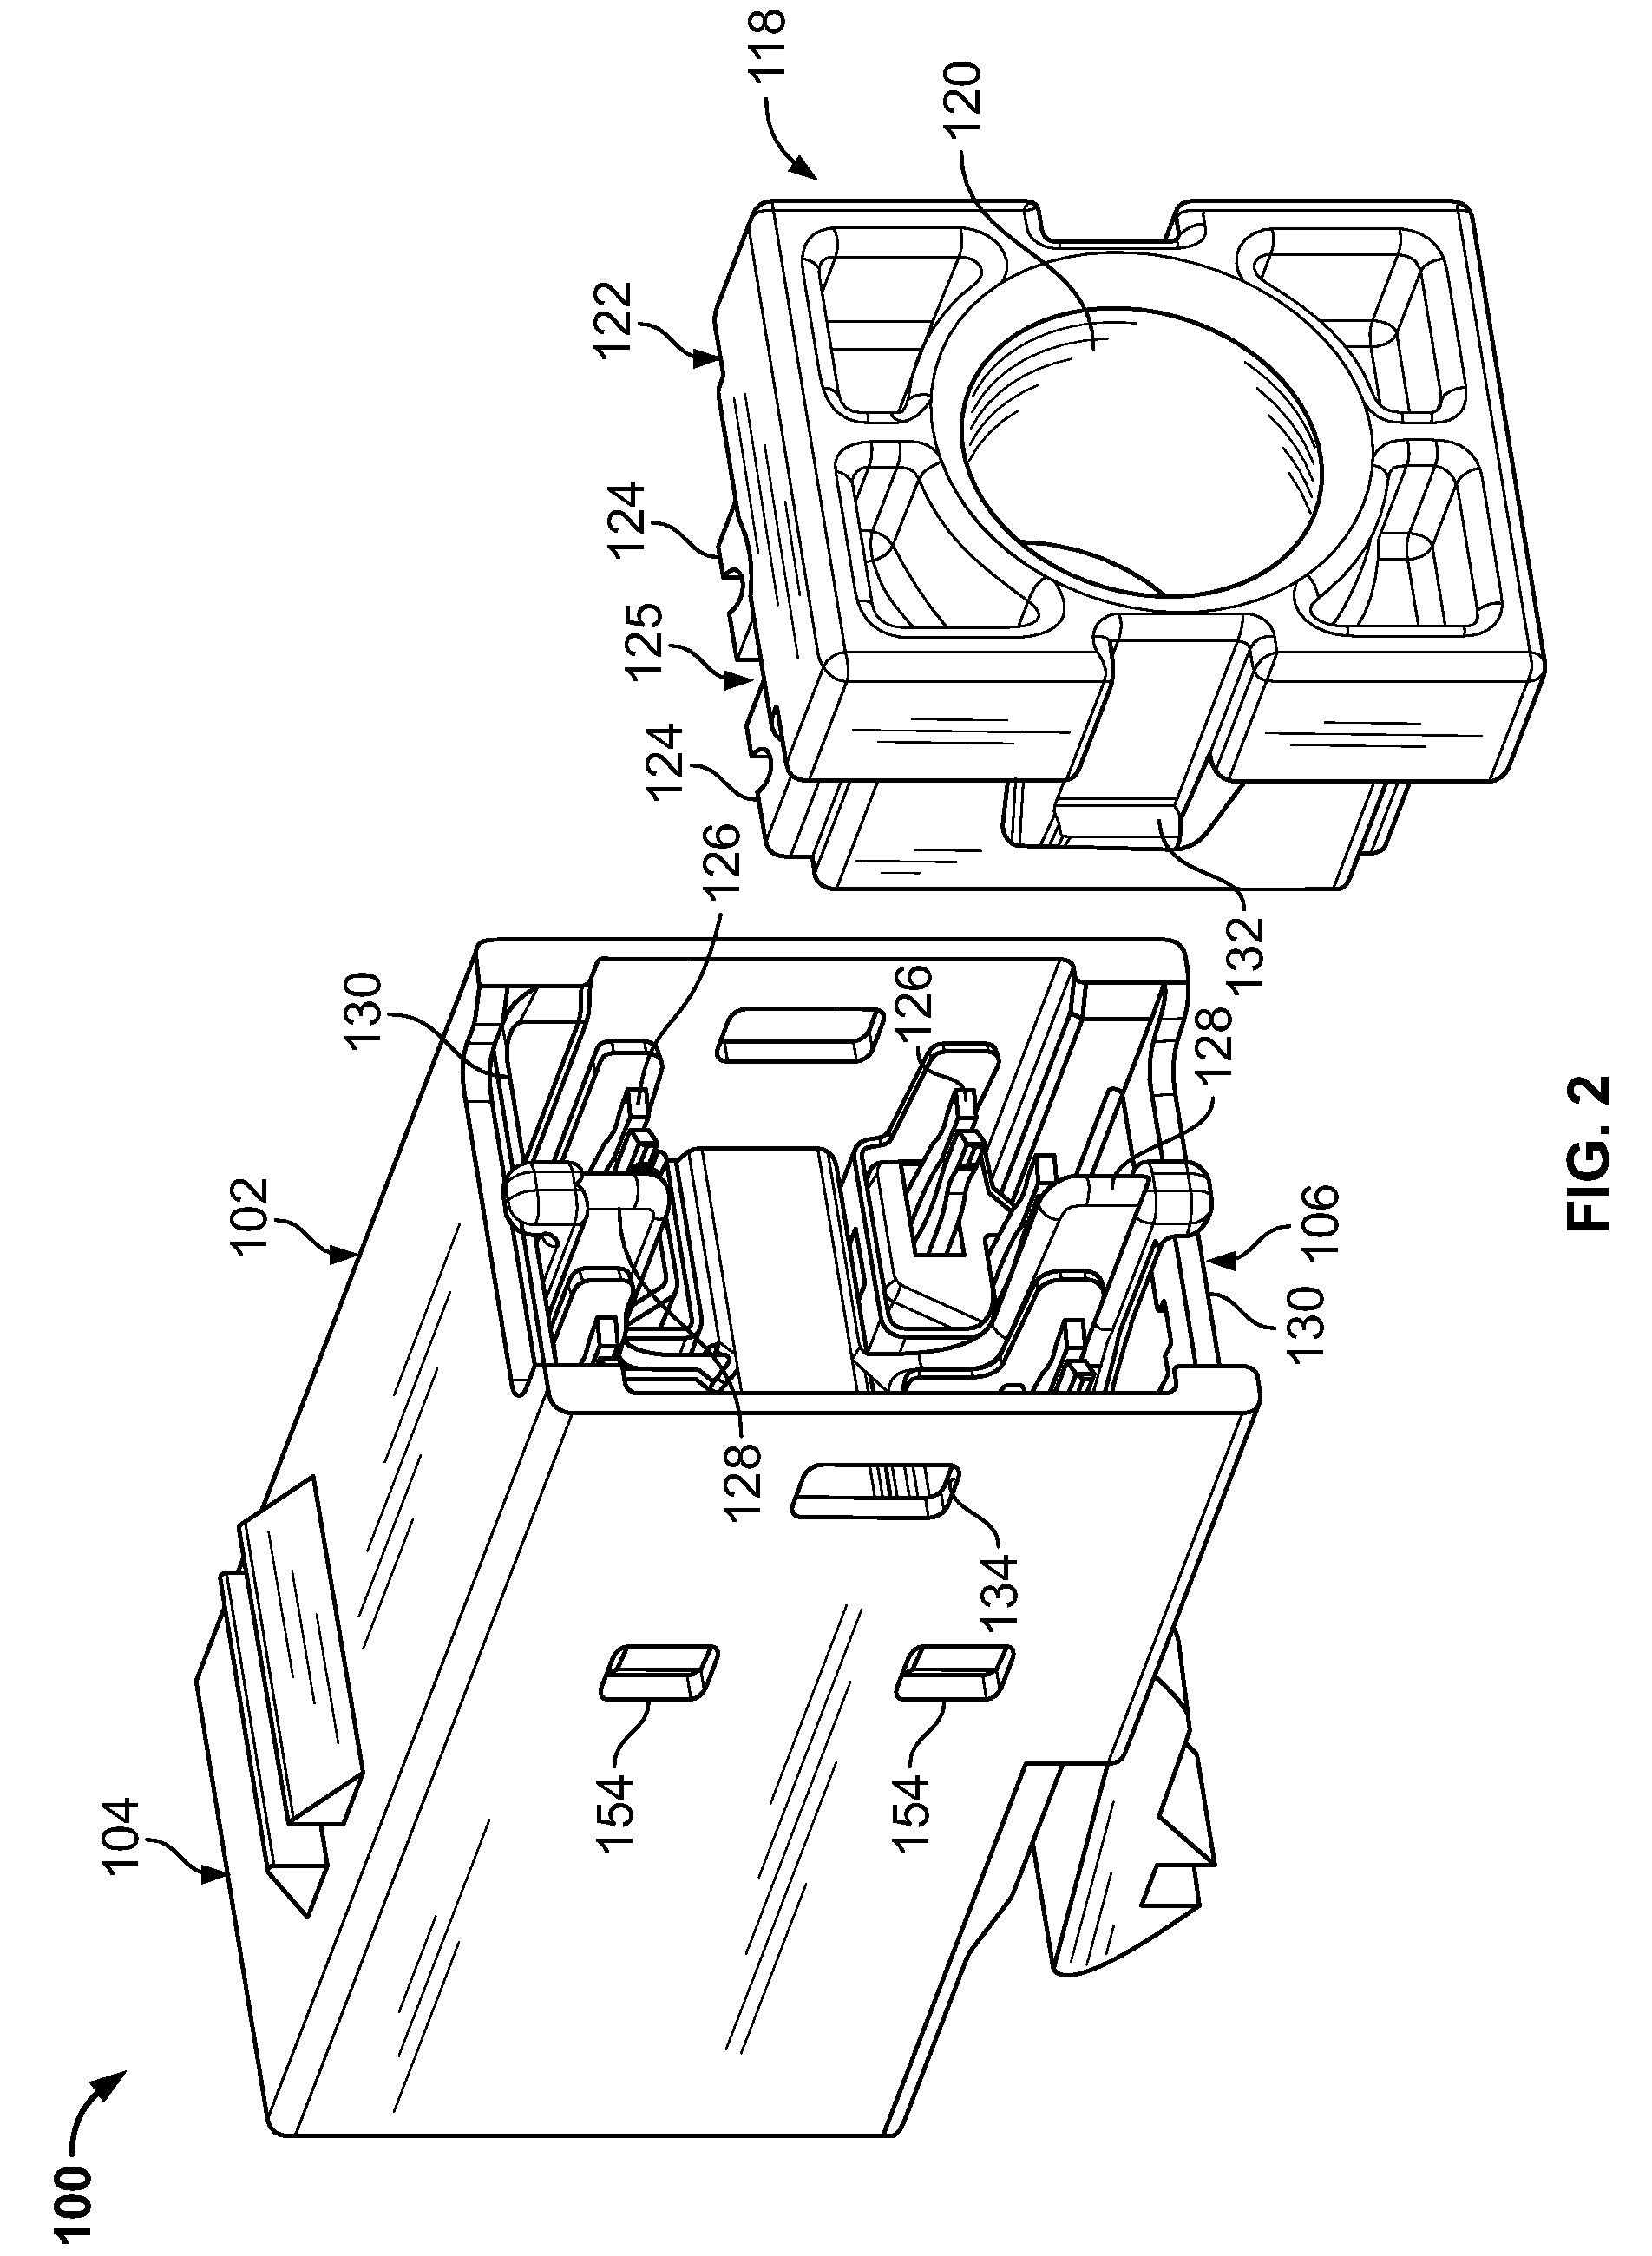 Electrical connector with enhanced back end design